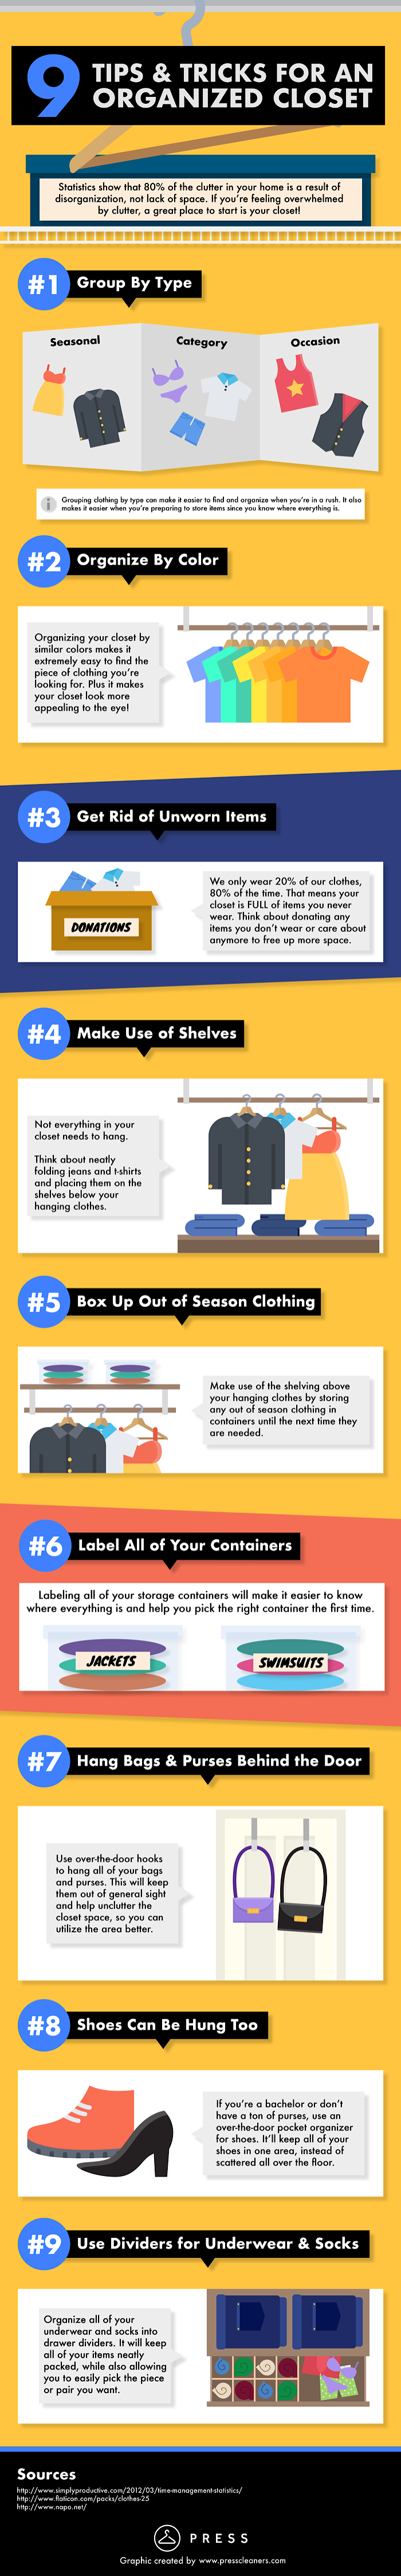 How to Organize Your Closet? - Infographic